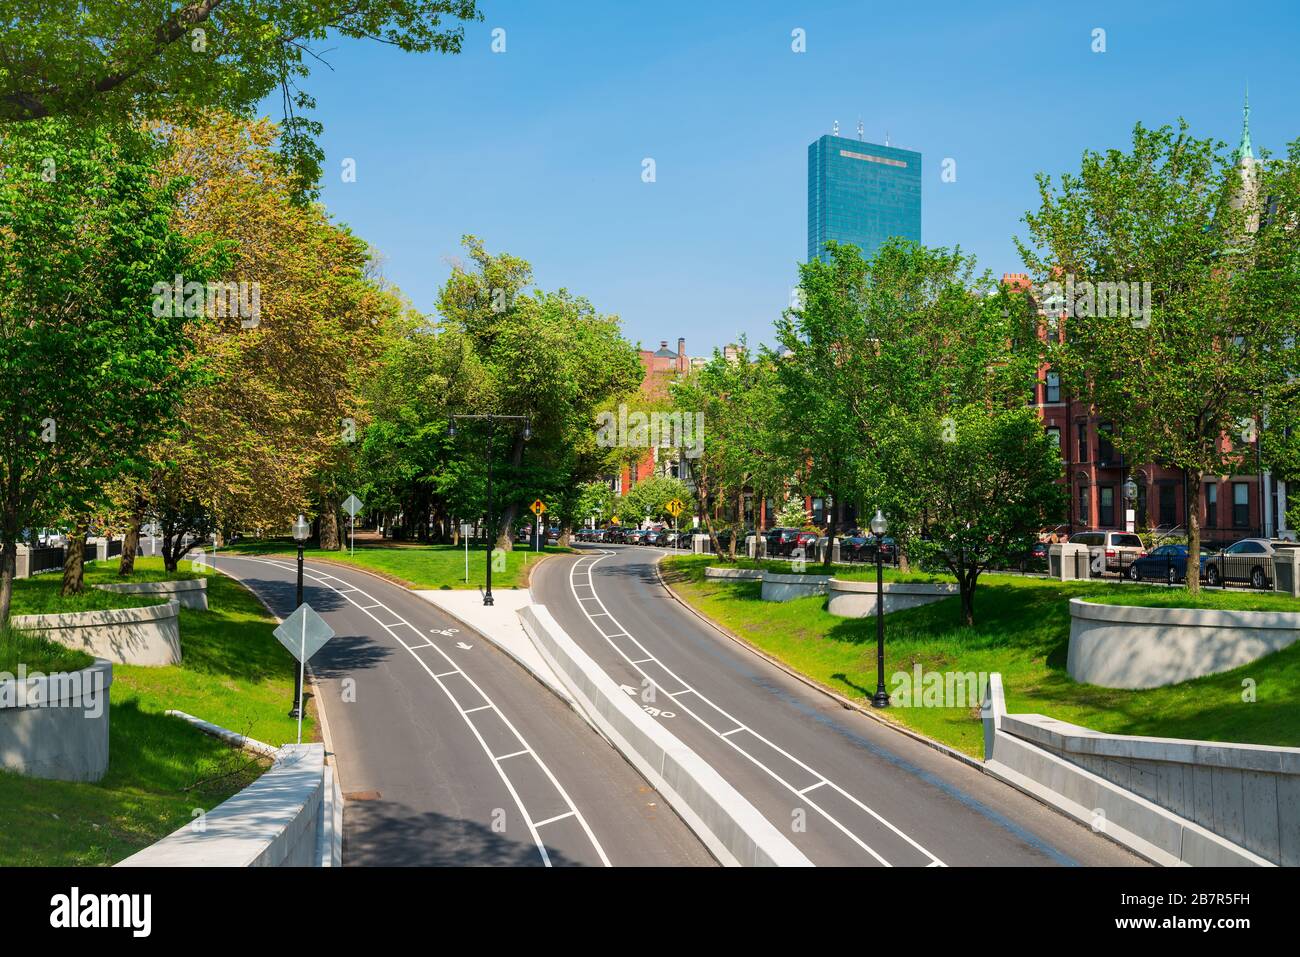 Typical street in Boston, Massachusetts during day time Stock Photo